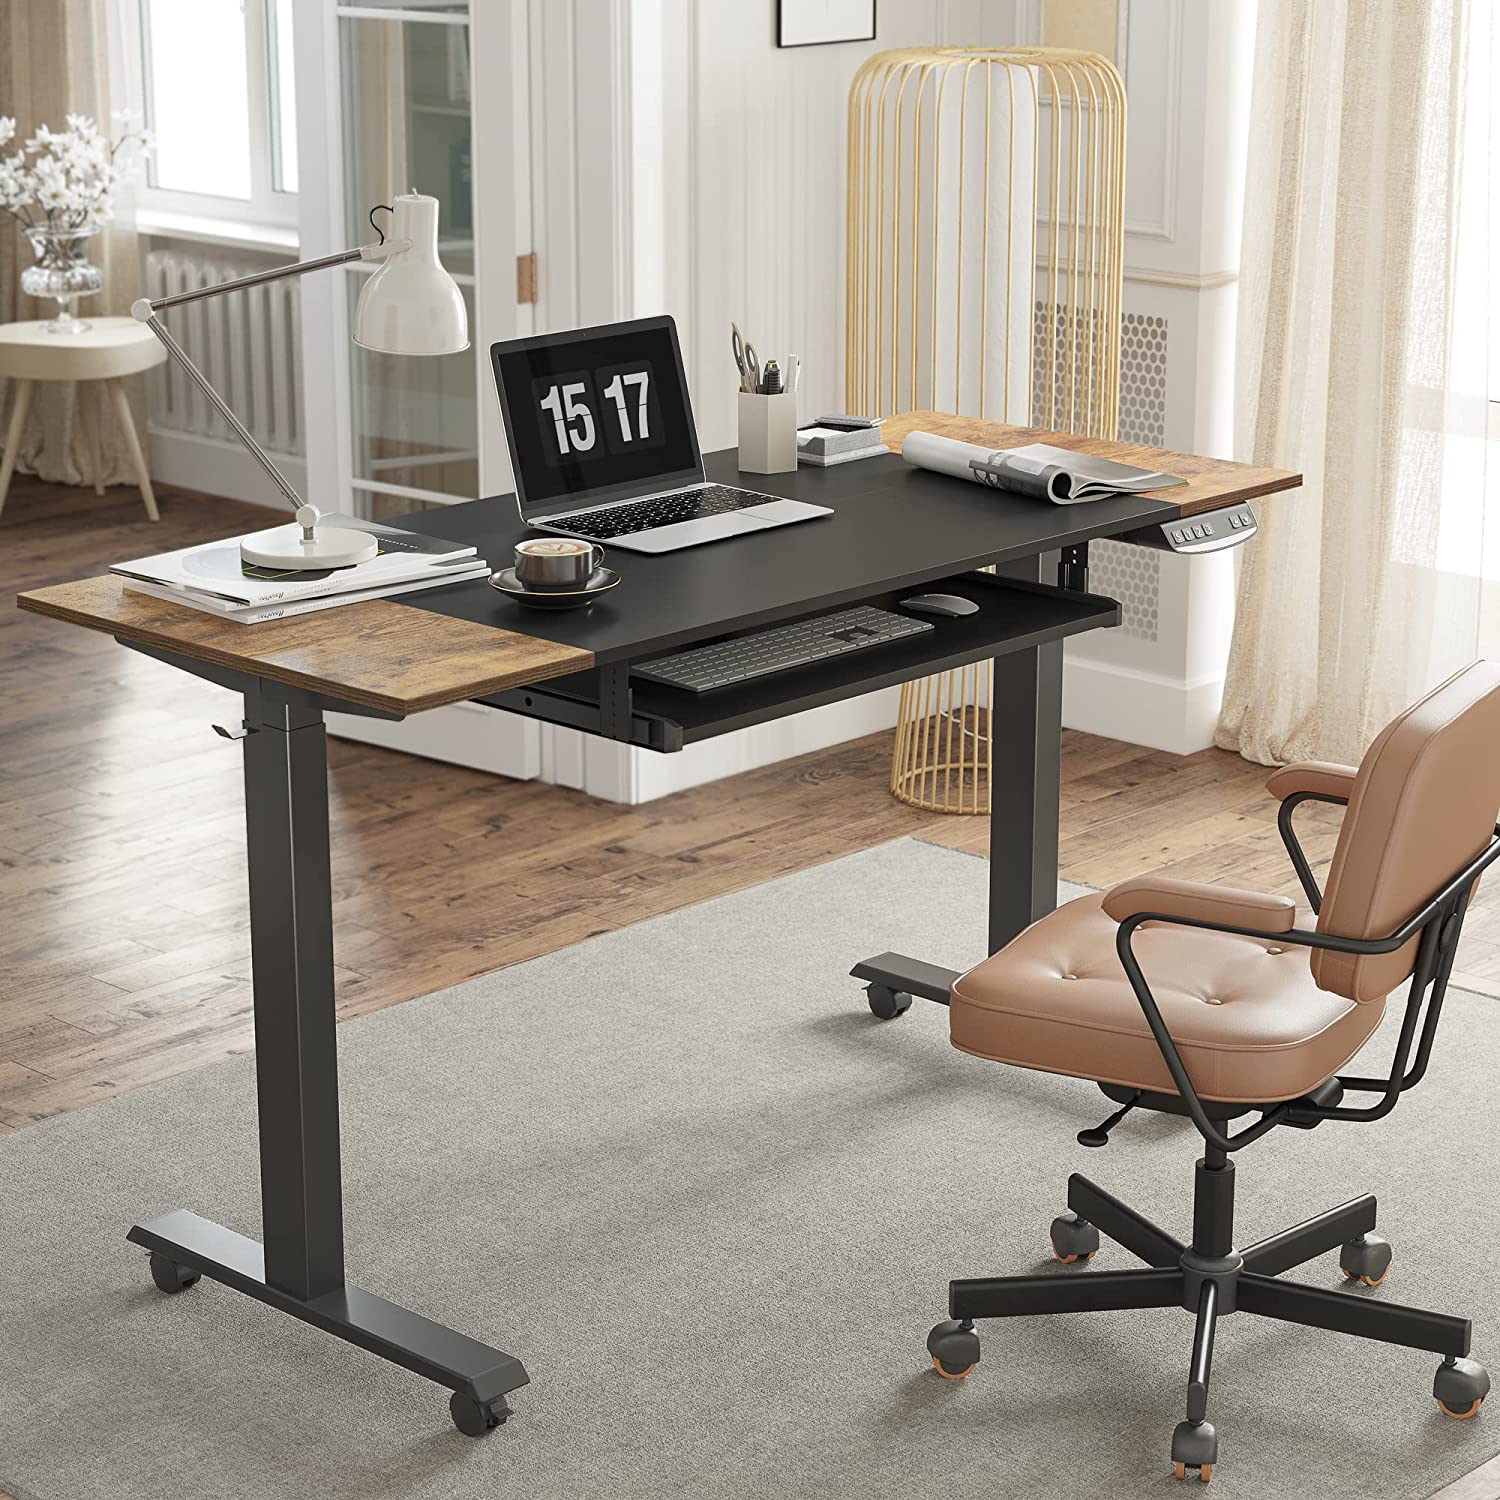 The Fezibo Adjustable Electric Standing Desk in a home office.